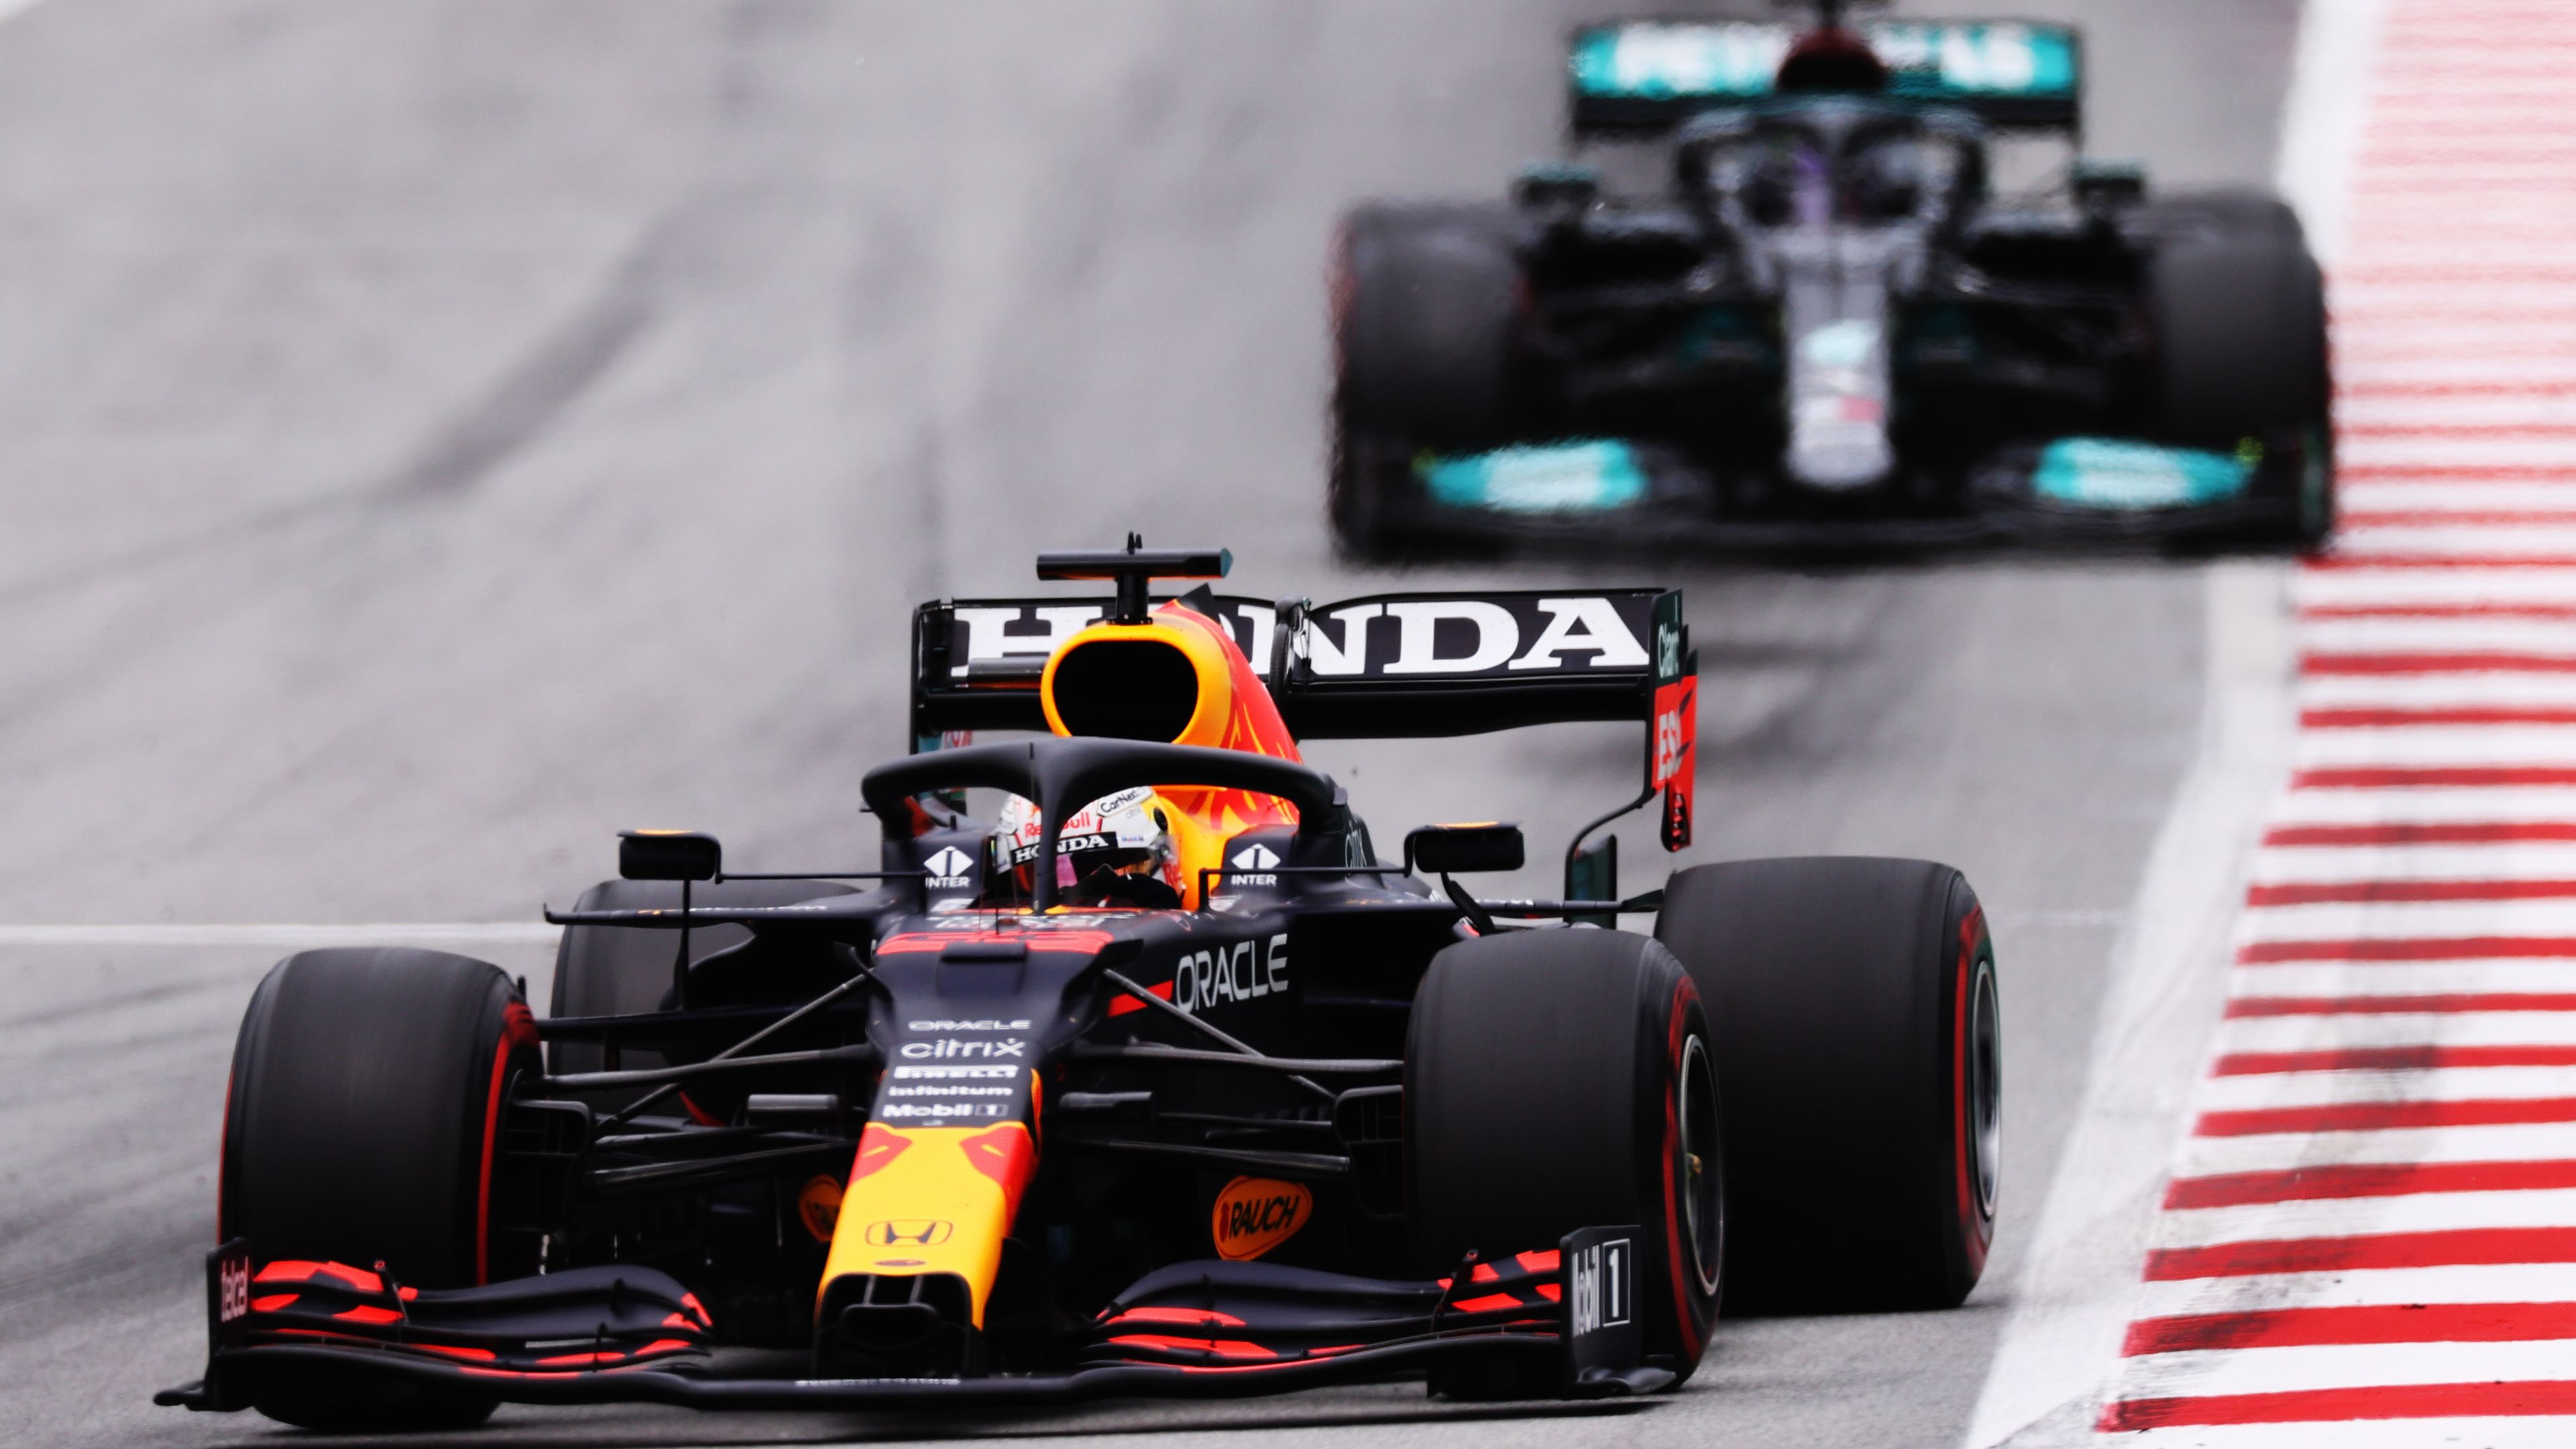 Max Verstappen's US Grand Prix victory a 'pivot point' in title fight with Lewis Hamilton, Martin Brundle says